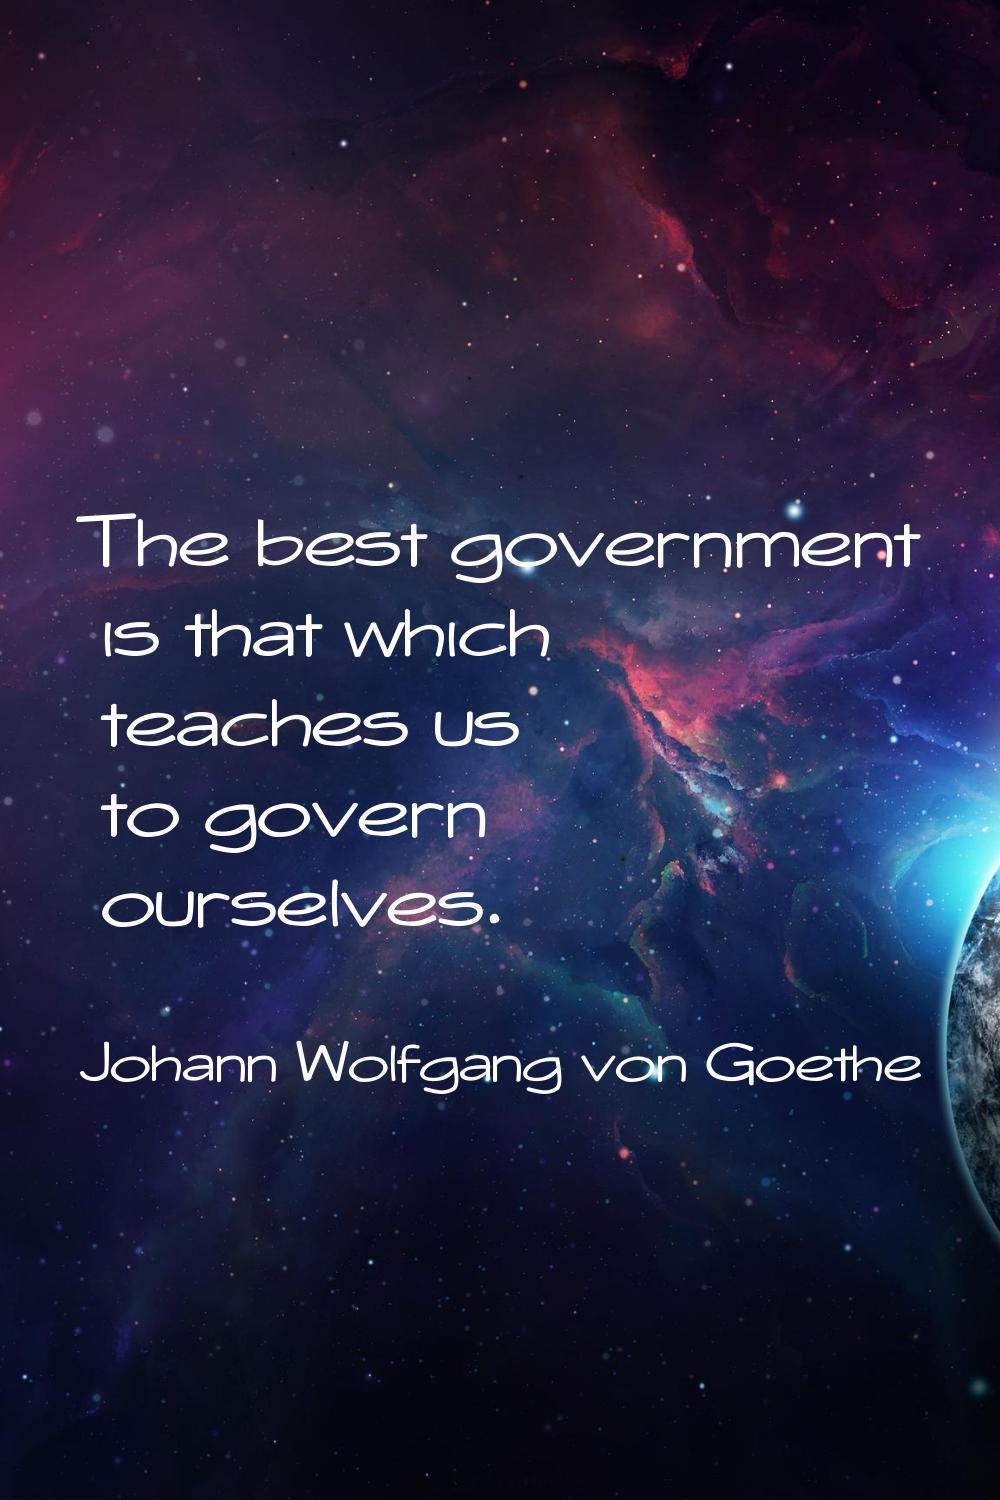 The best government is that which teaches us to govern ourselves.